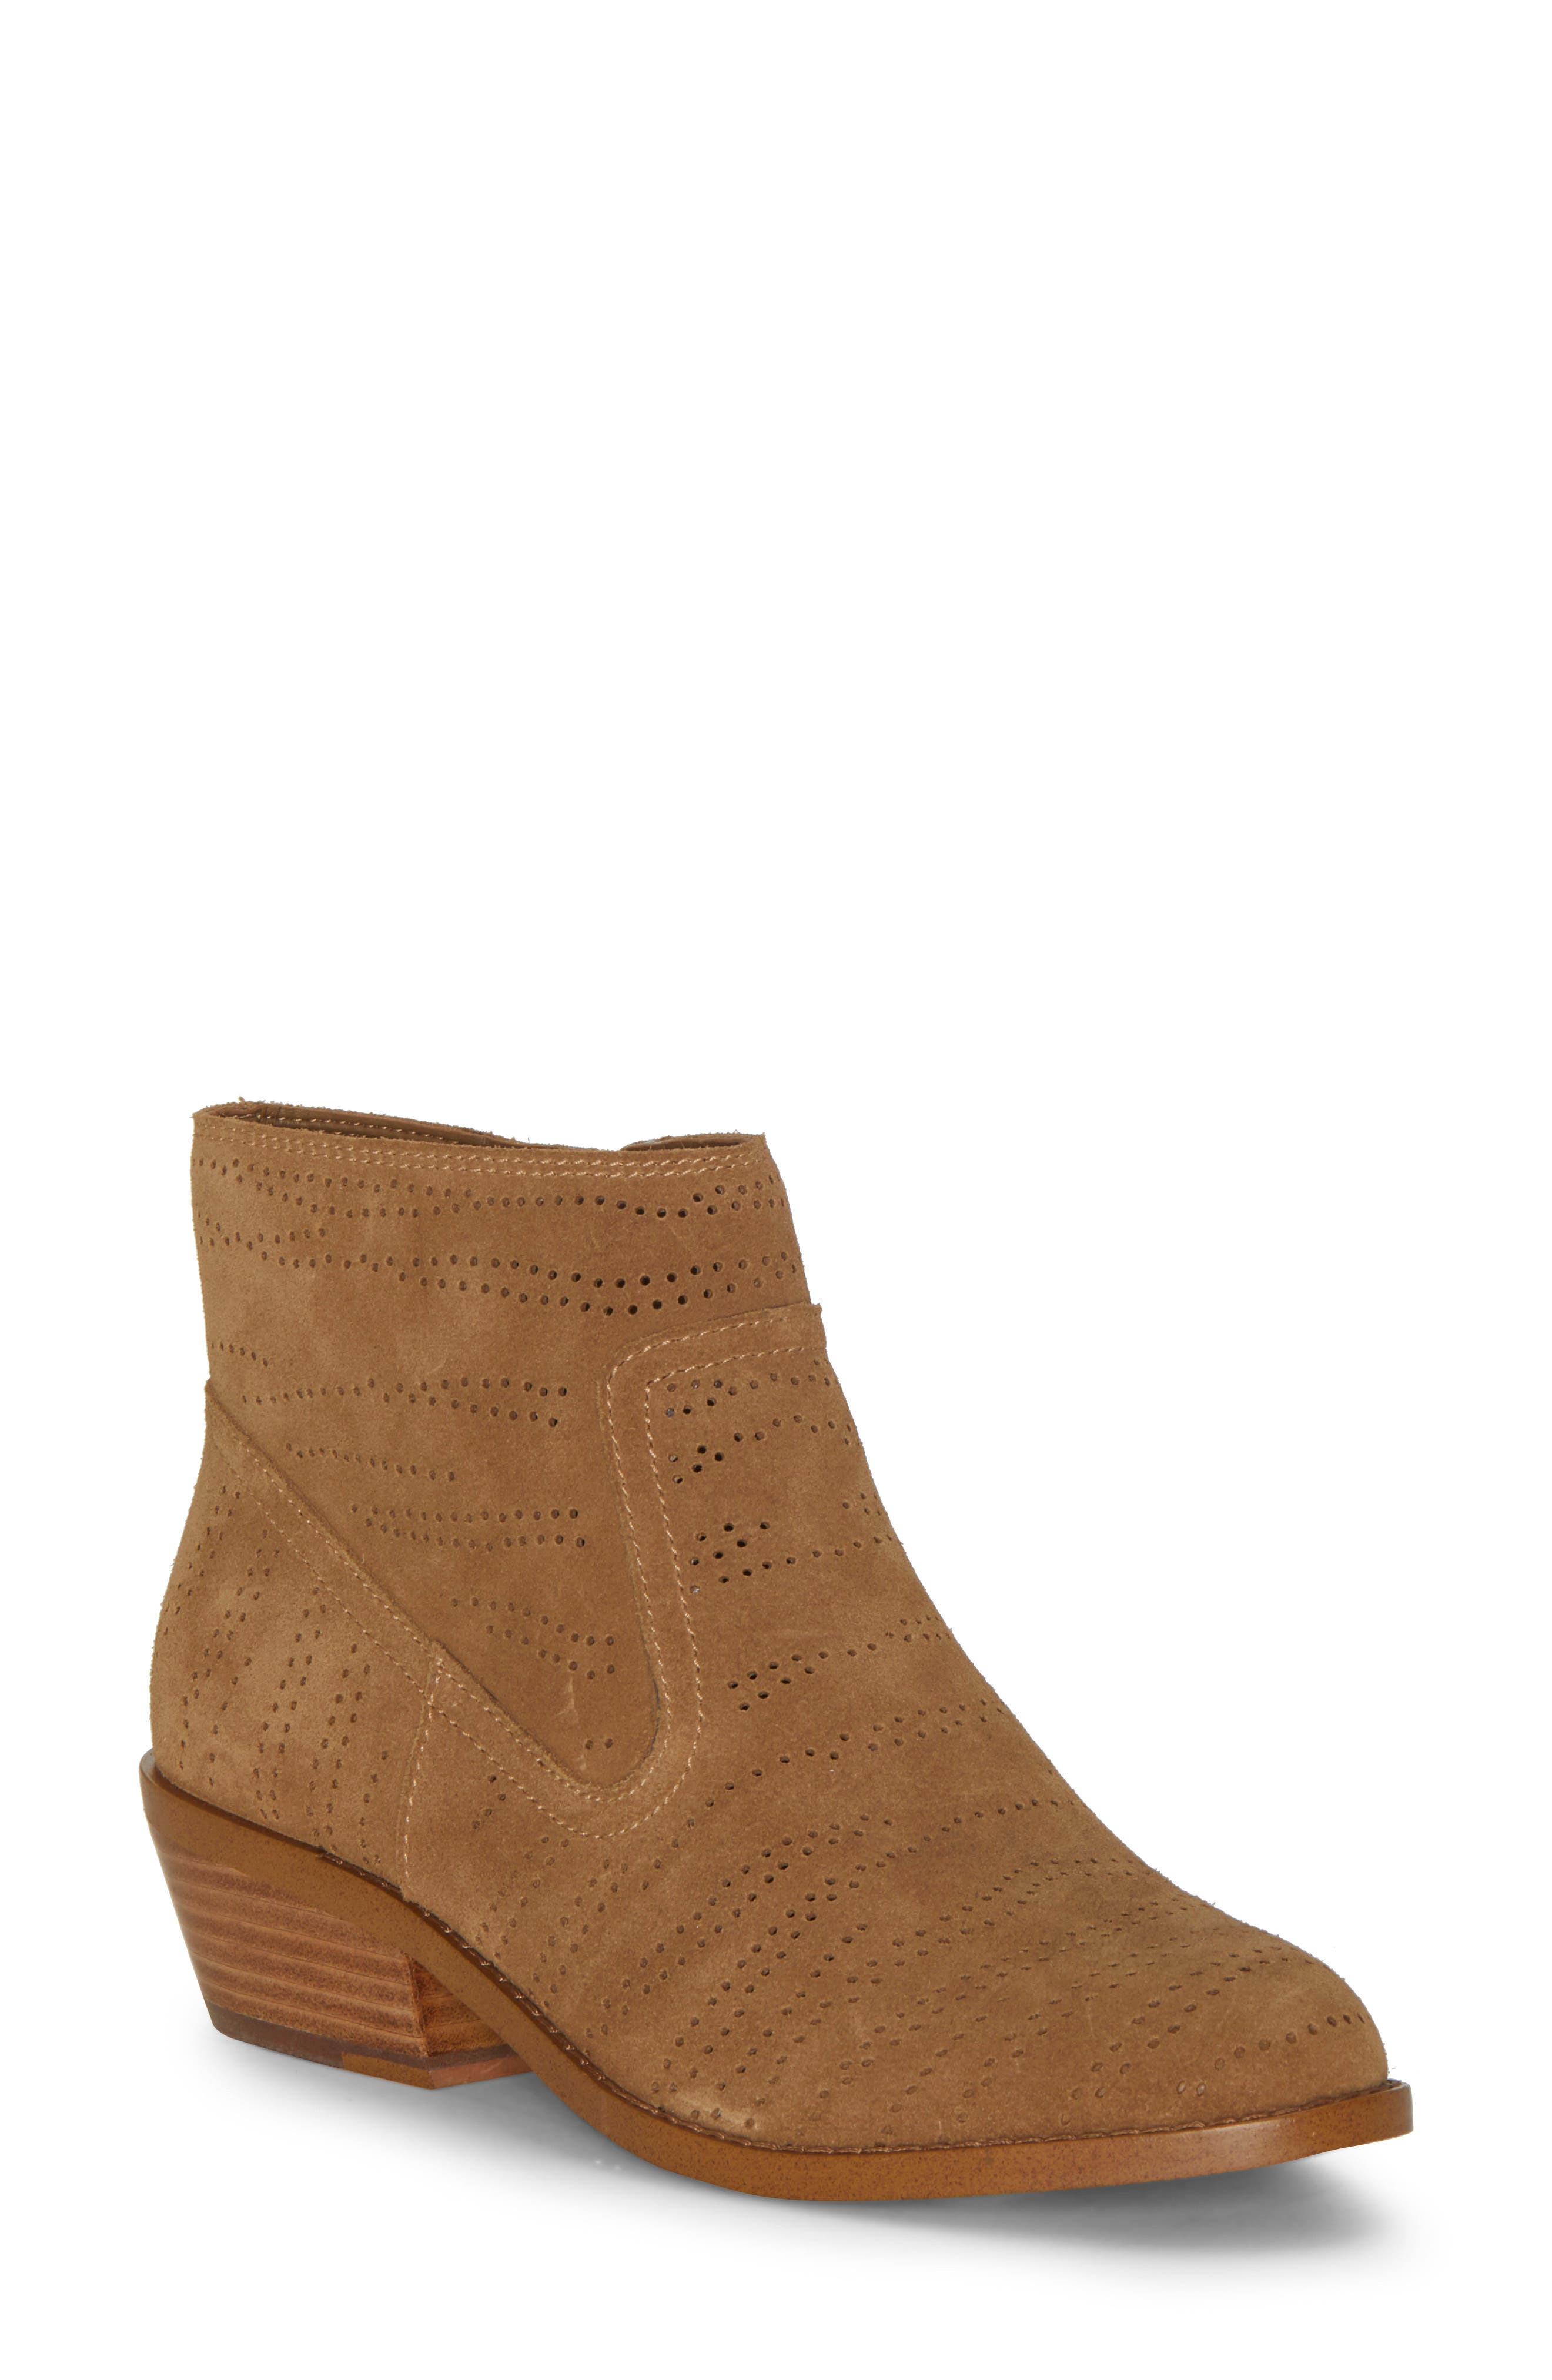 nordstrom rack clearance boots